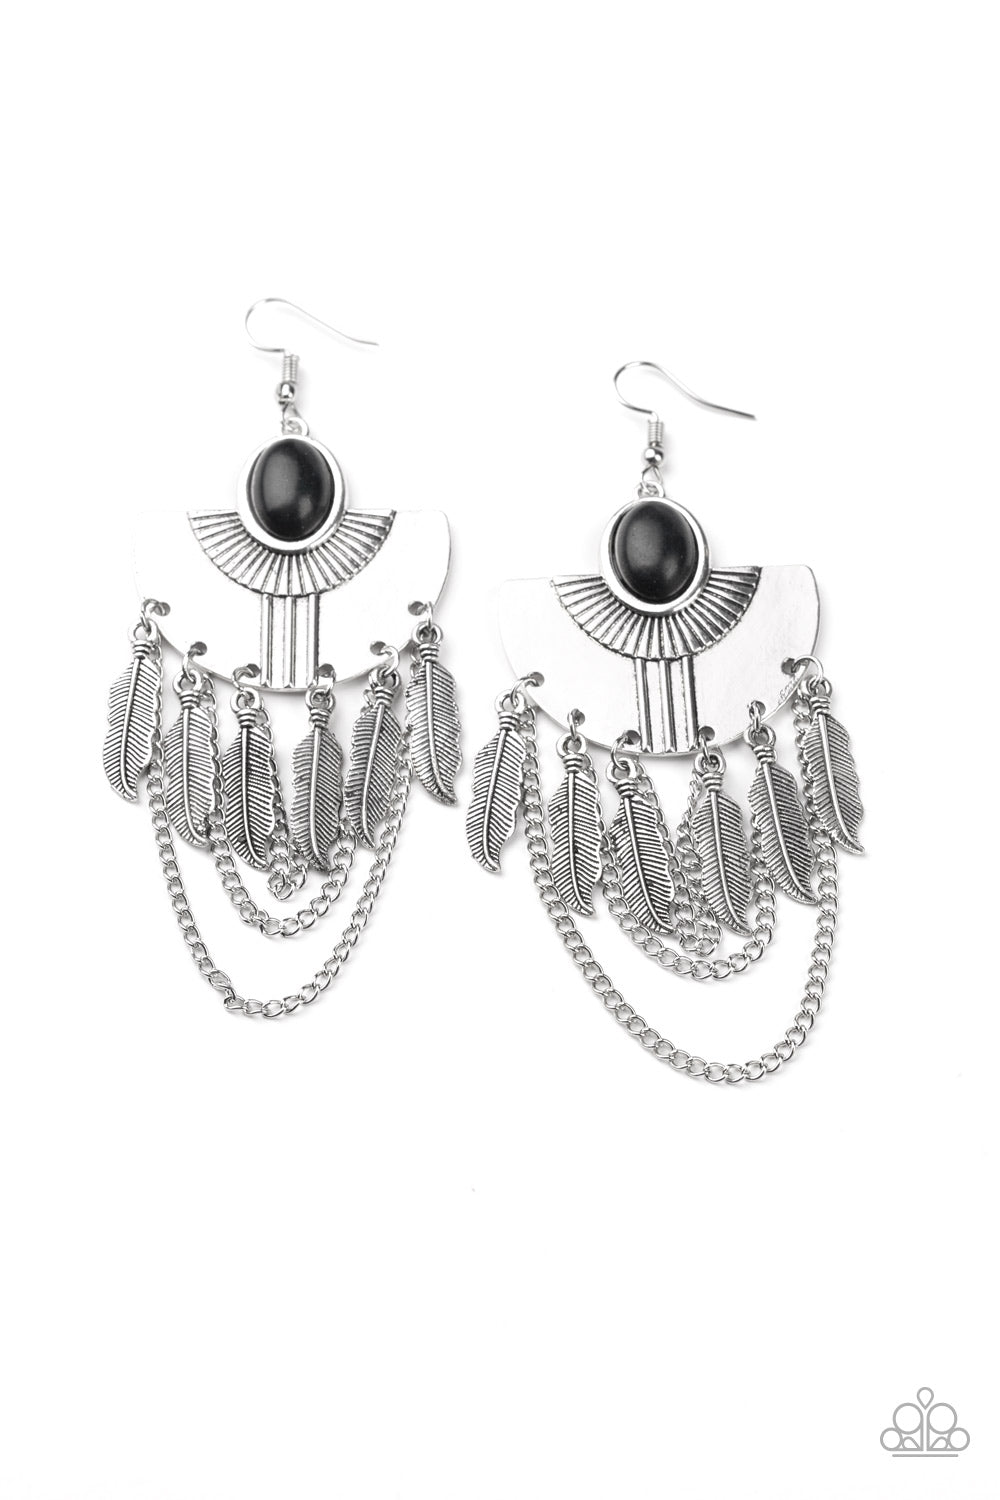 SURE THING, CHIEF! - BLACK POLISHED STONE FEATHER FRINGE CHAINS TRIBAL SOUTHWEST EARRINGS